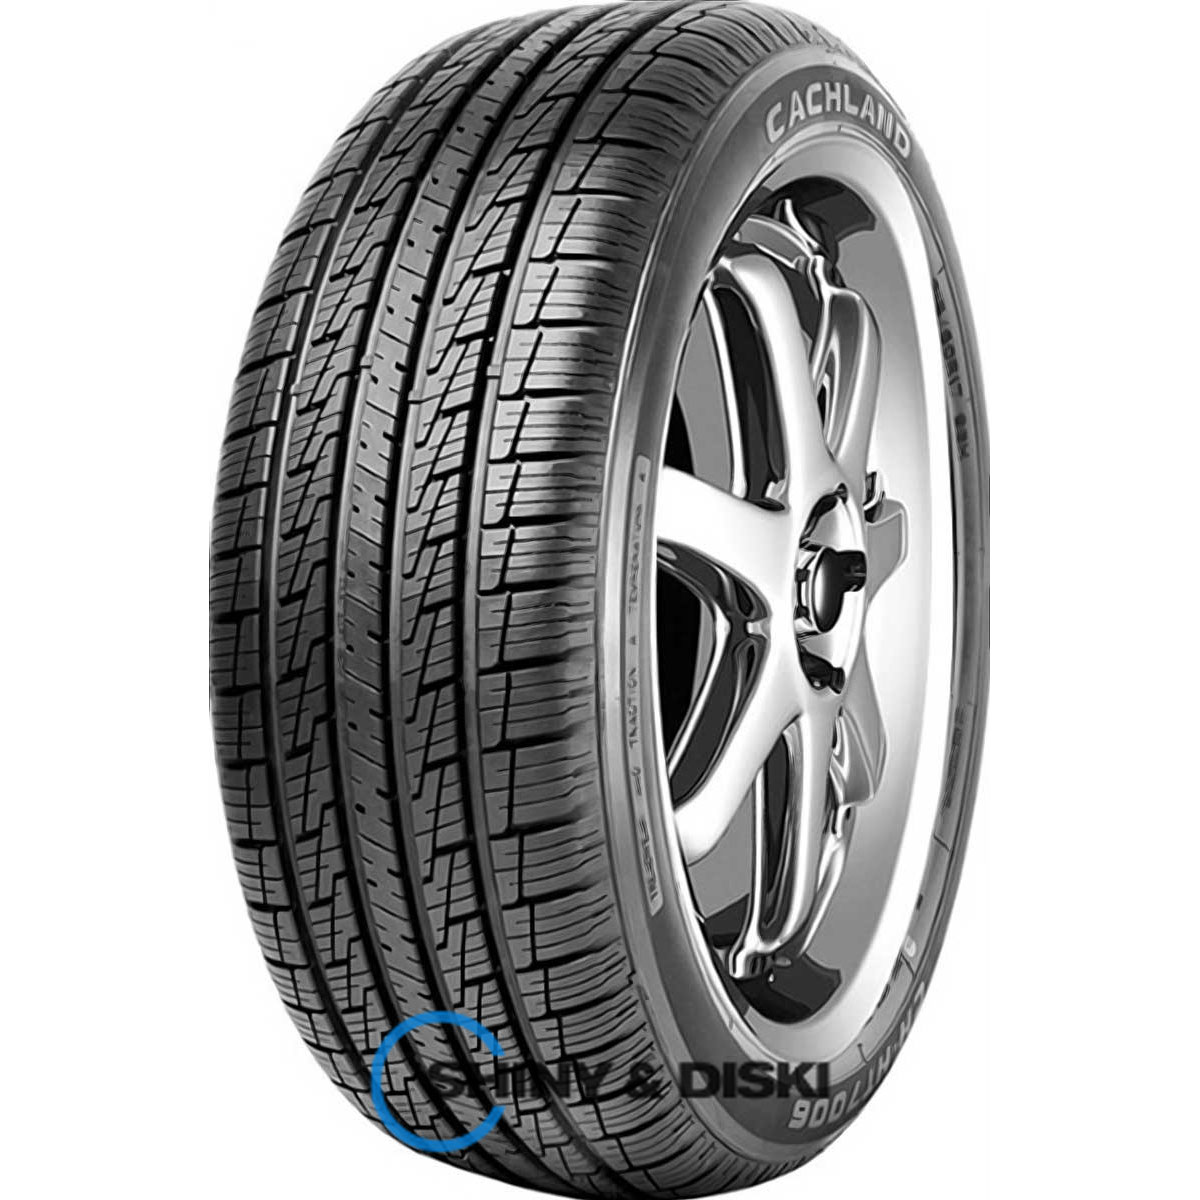 cachland ch-ht7006 265/65 r17 112h